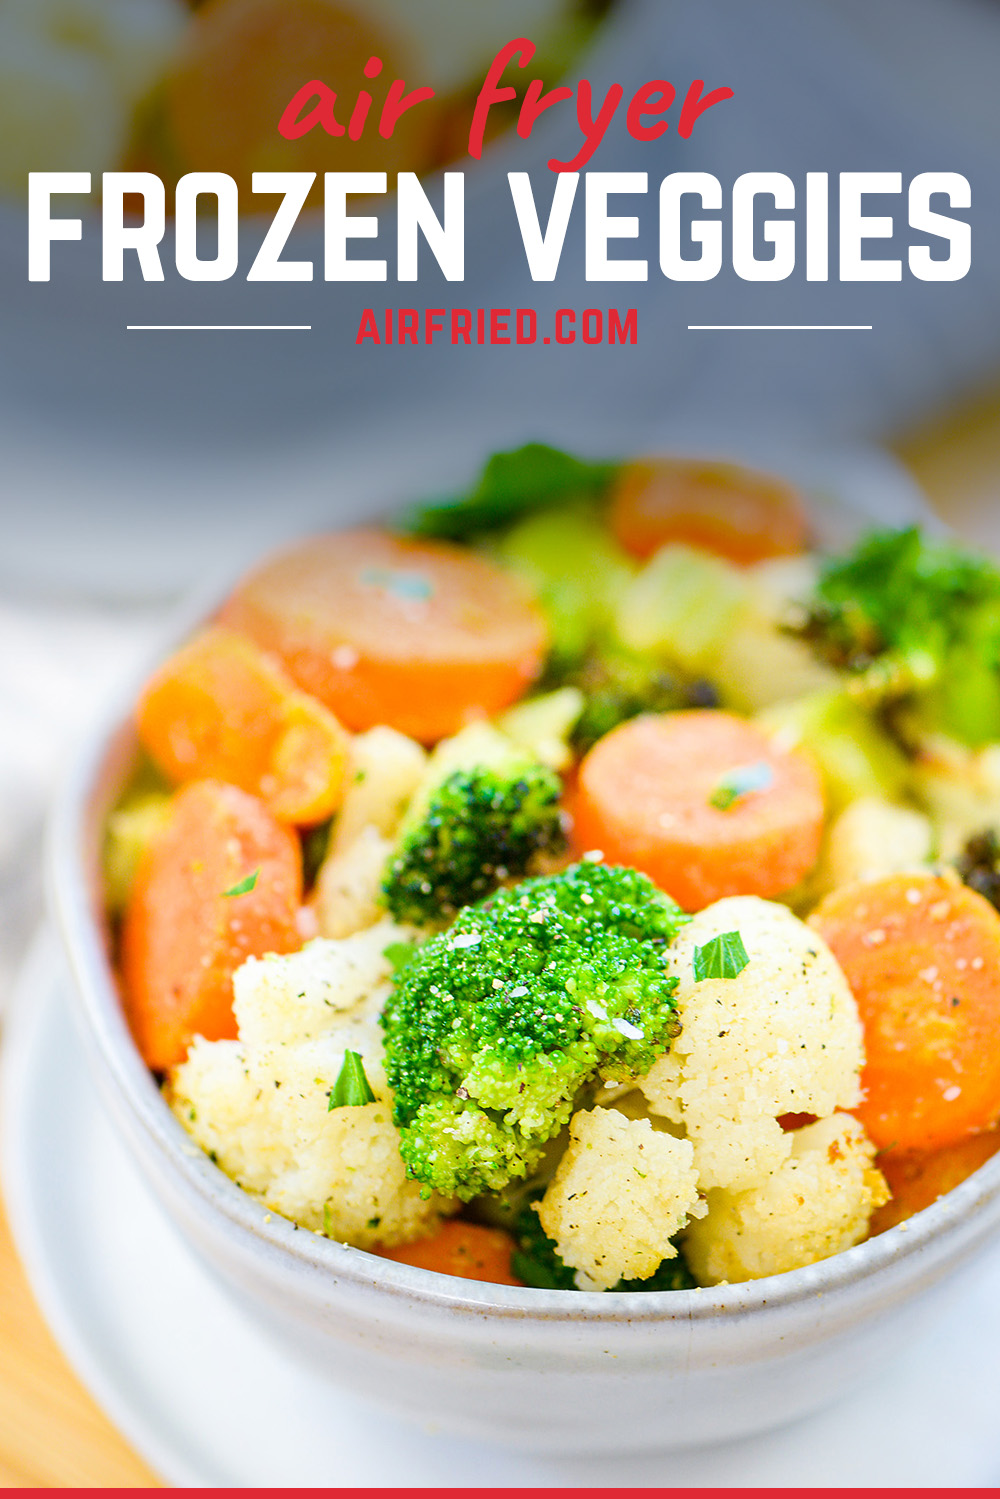 These frozen veggies are easy to cook evenly and easily in the air fryer!  We also show you a simple seasoning that makes them all taste good in this healthy snack!